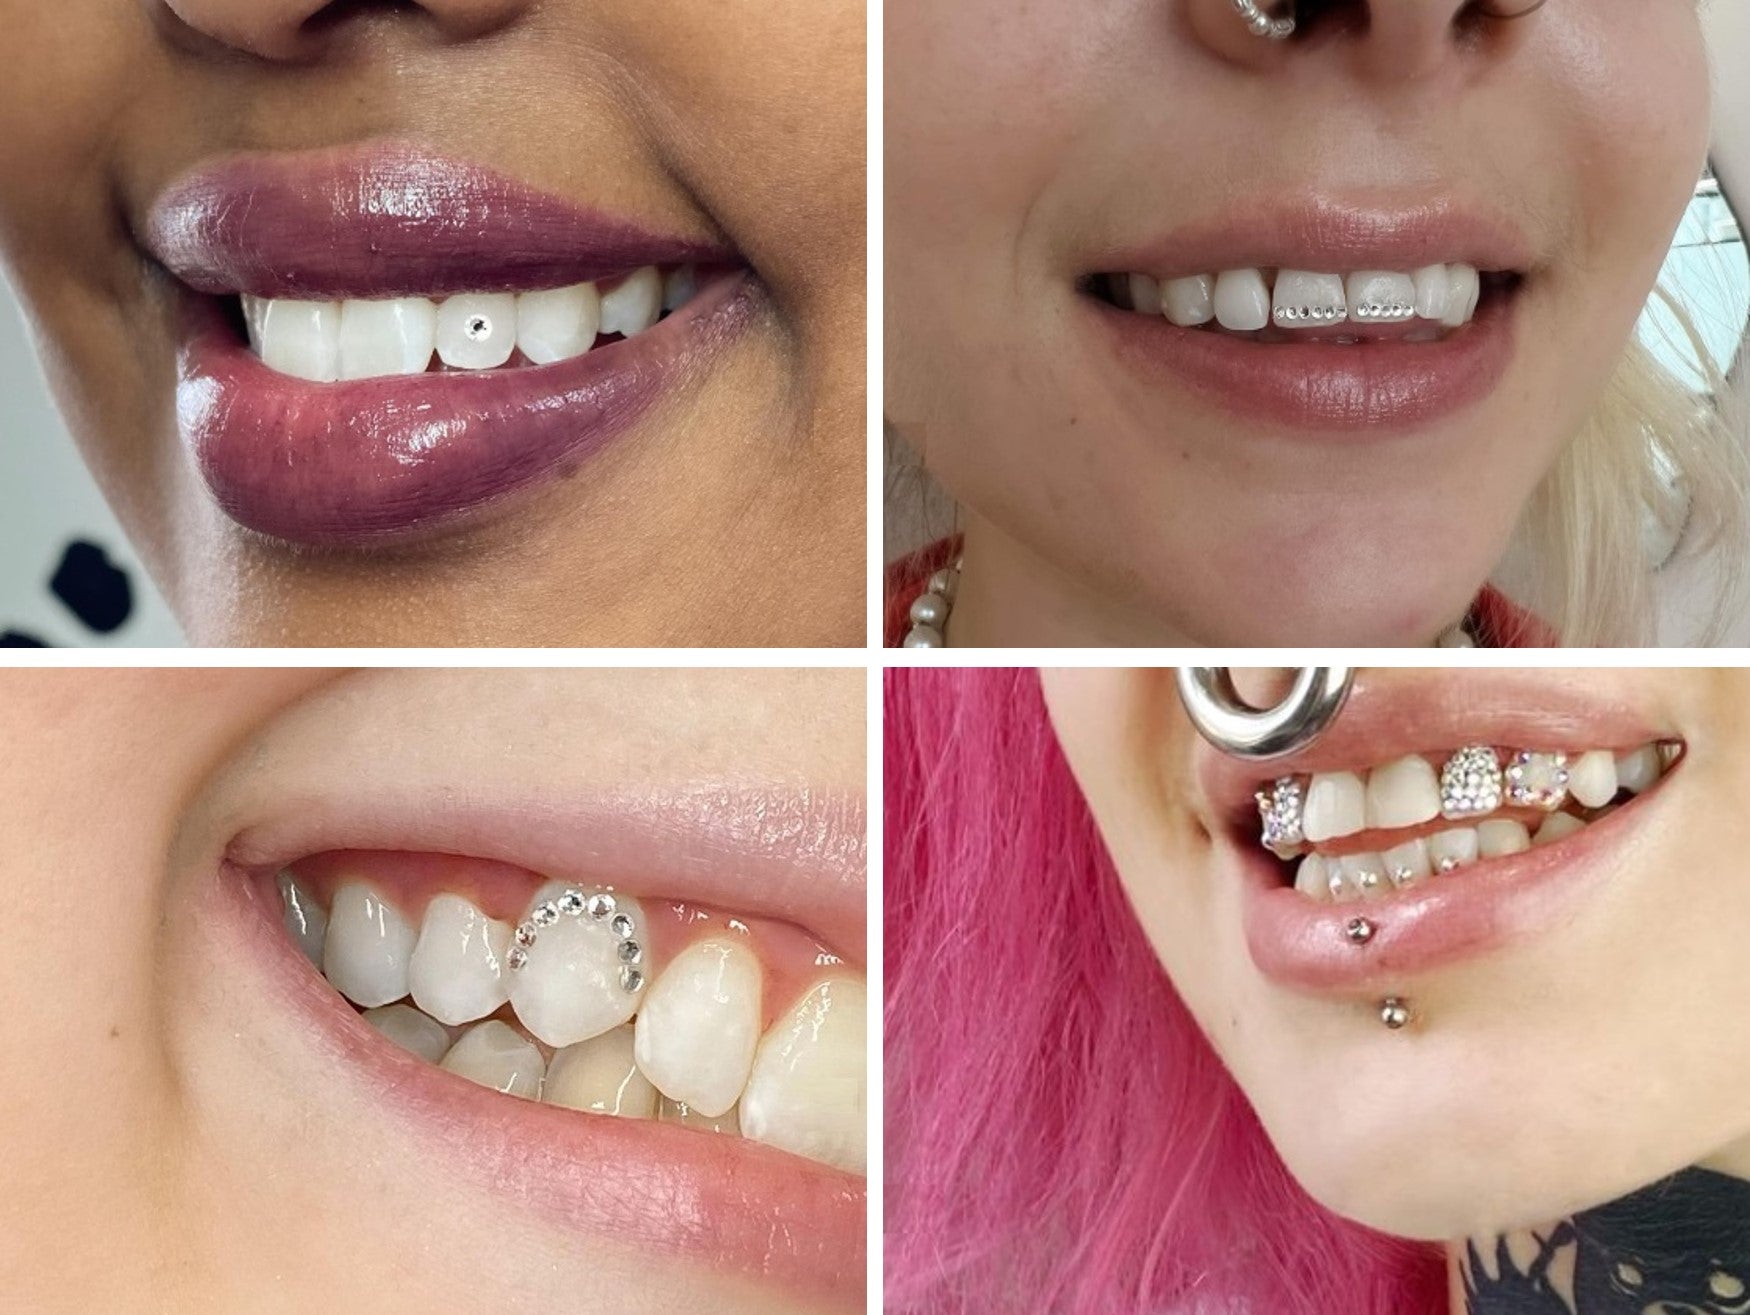 Tooth gems are back on trend and here to stay